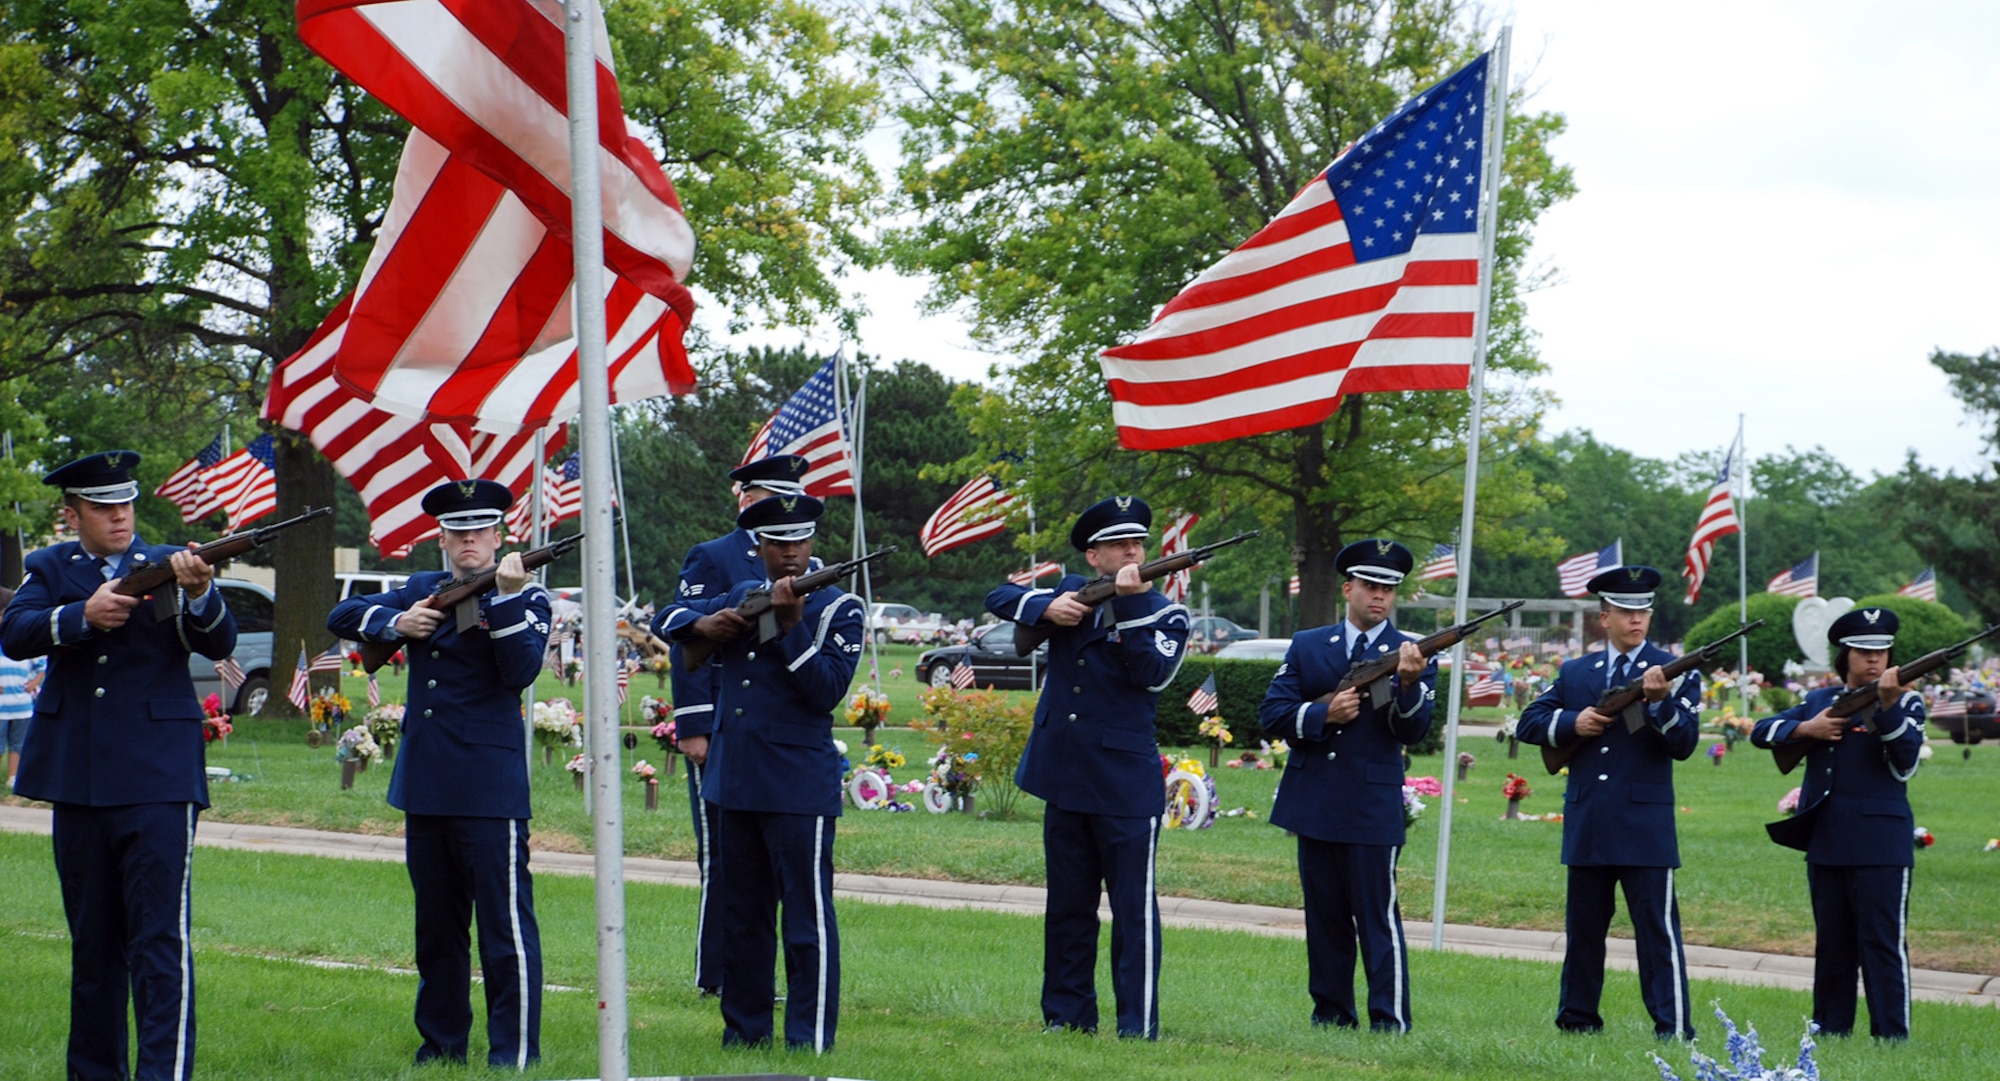 McConnell’s Honor Guard members perform a rifle sequence more commonly known as a 21-gun salute at the 49th annual Memorial Day observance at Resthaven mortuary and cemetery in Wichita, May 28. (Photo by Airman 1st Class Jessica Lockoski)